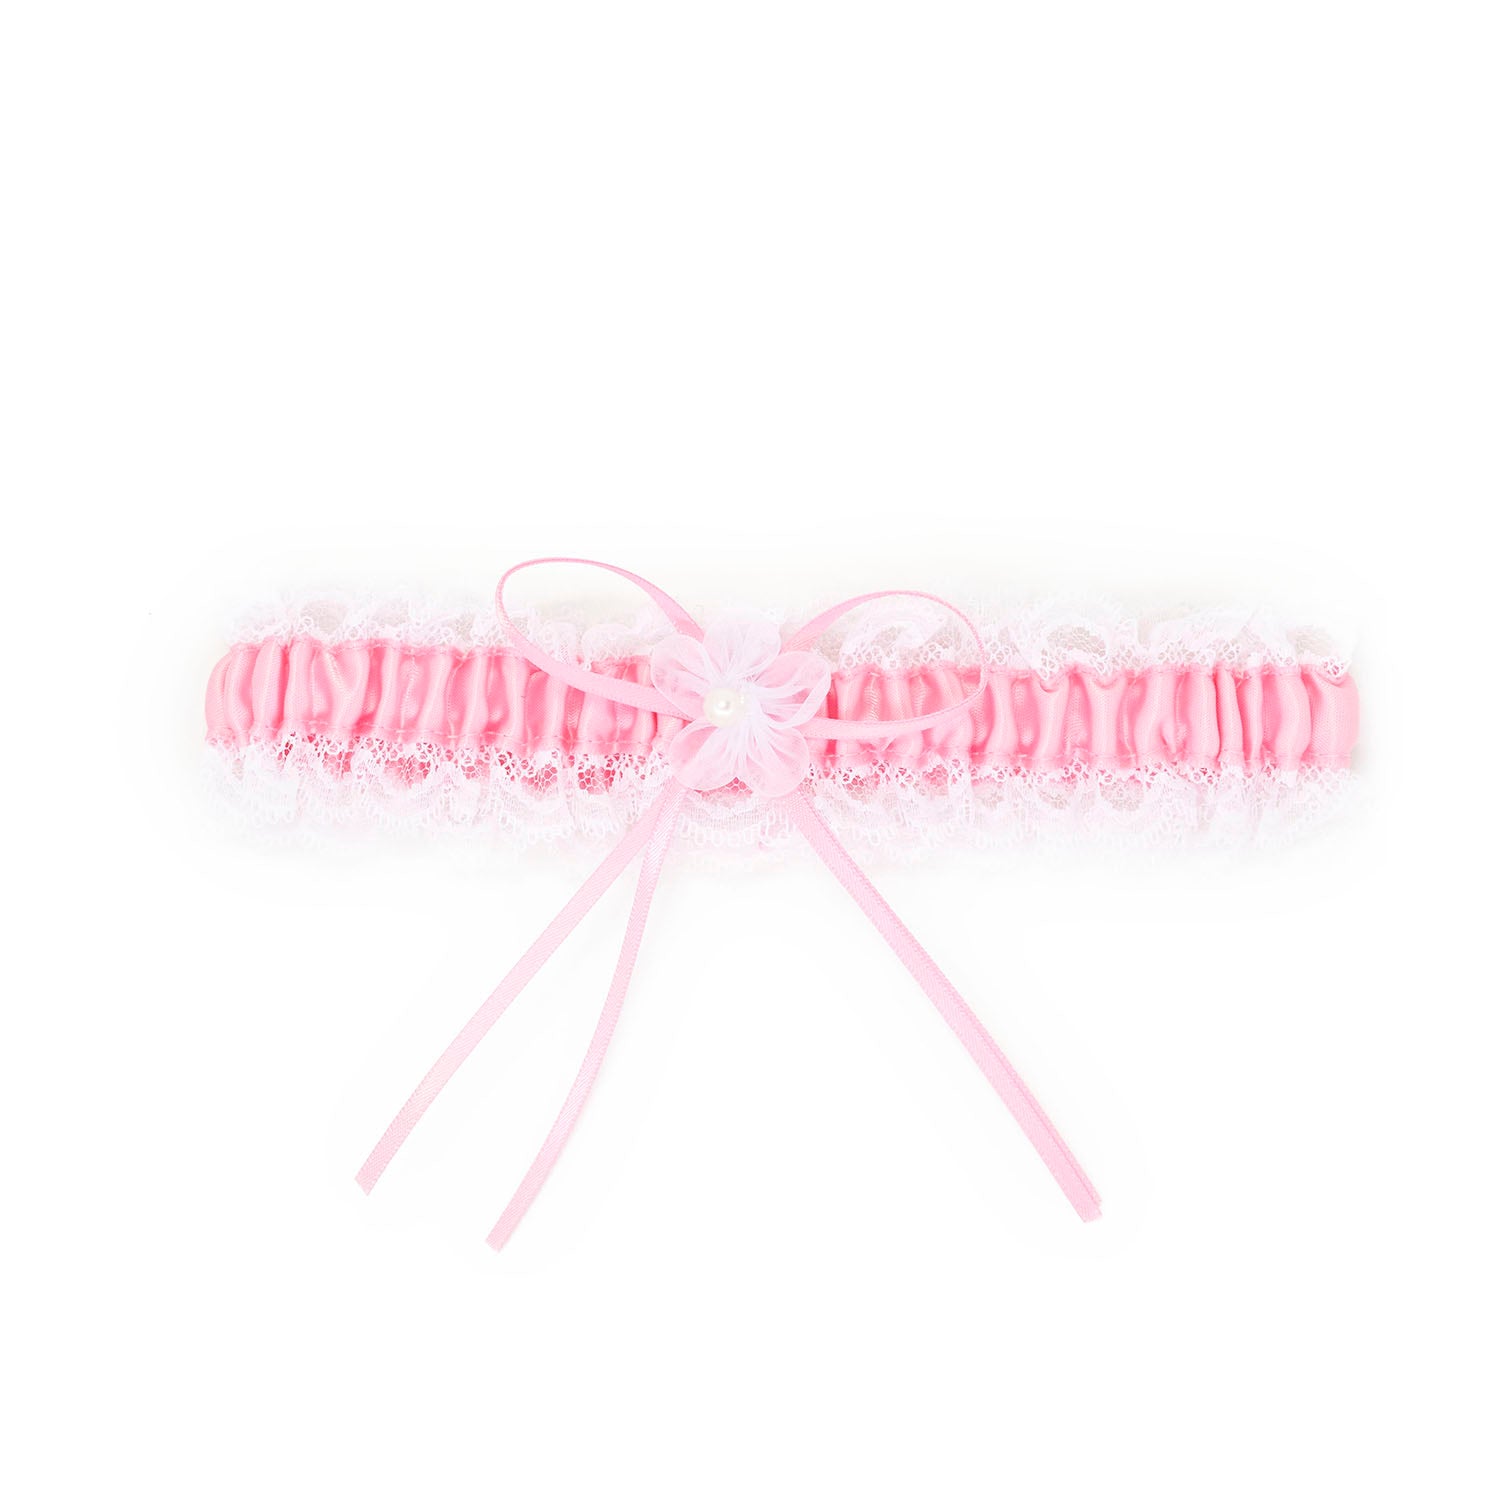 Pink wedding garter for bride with lace